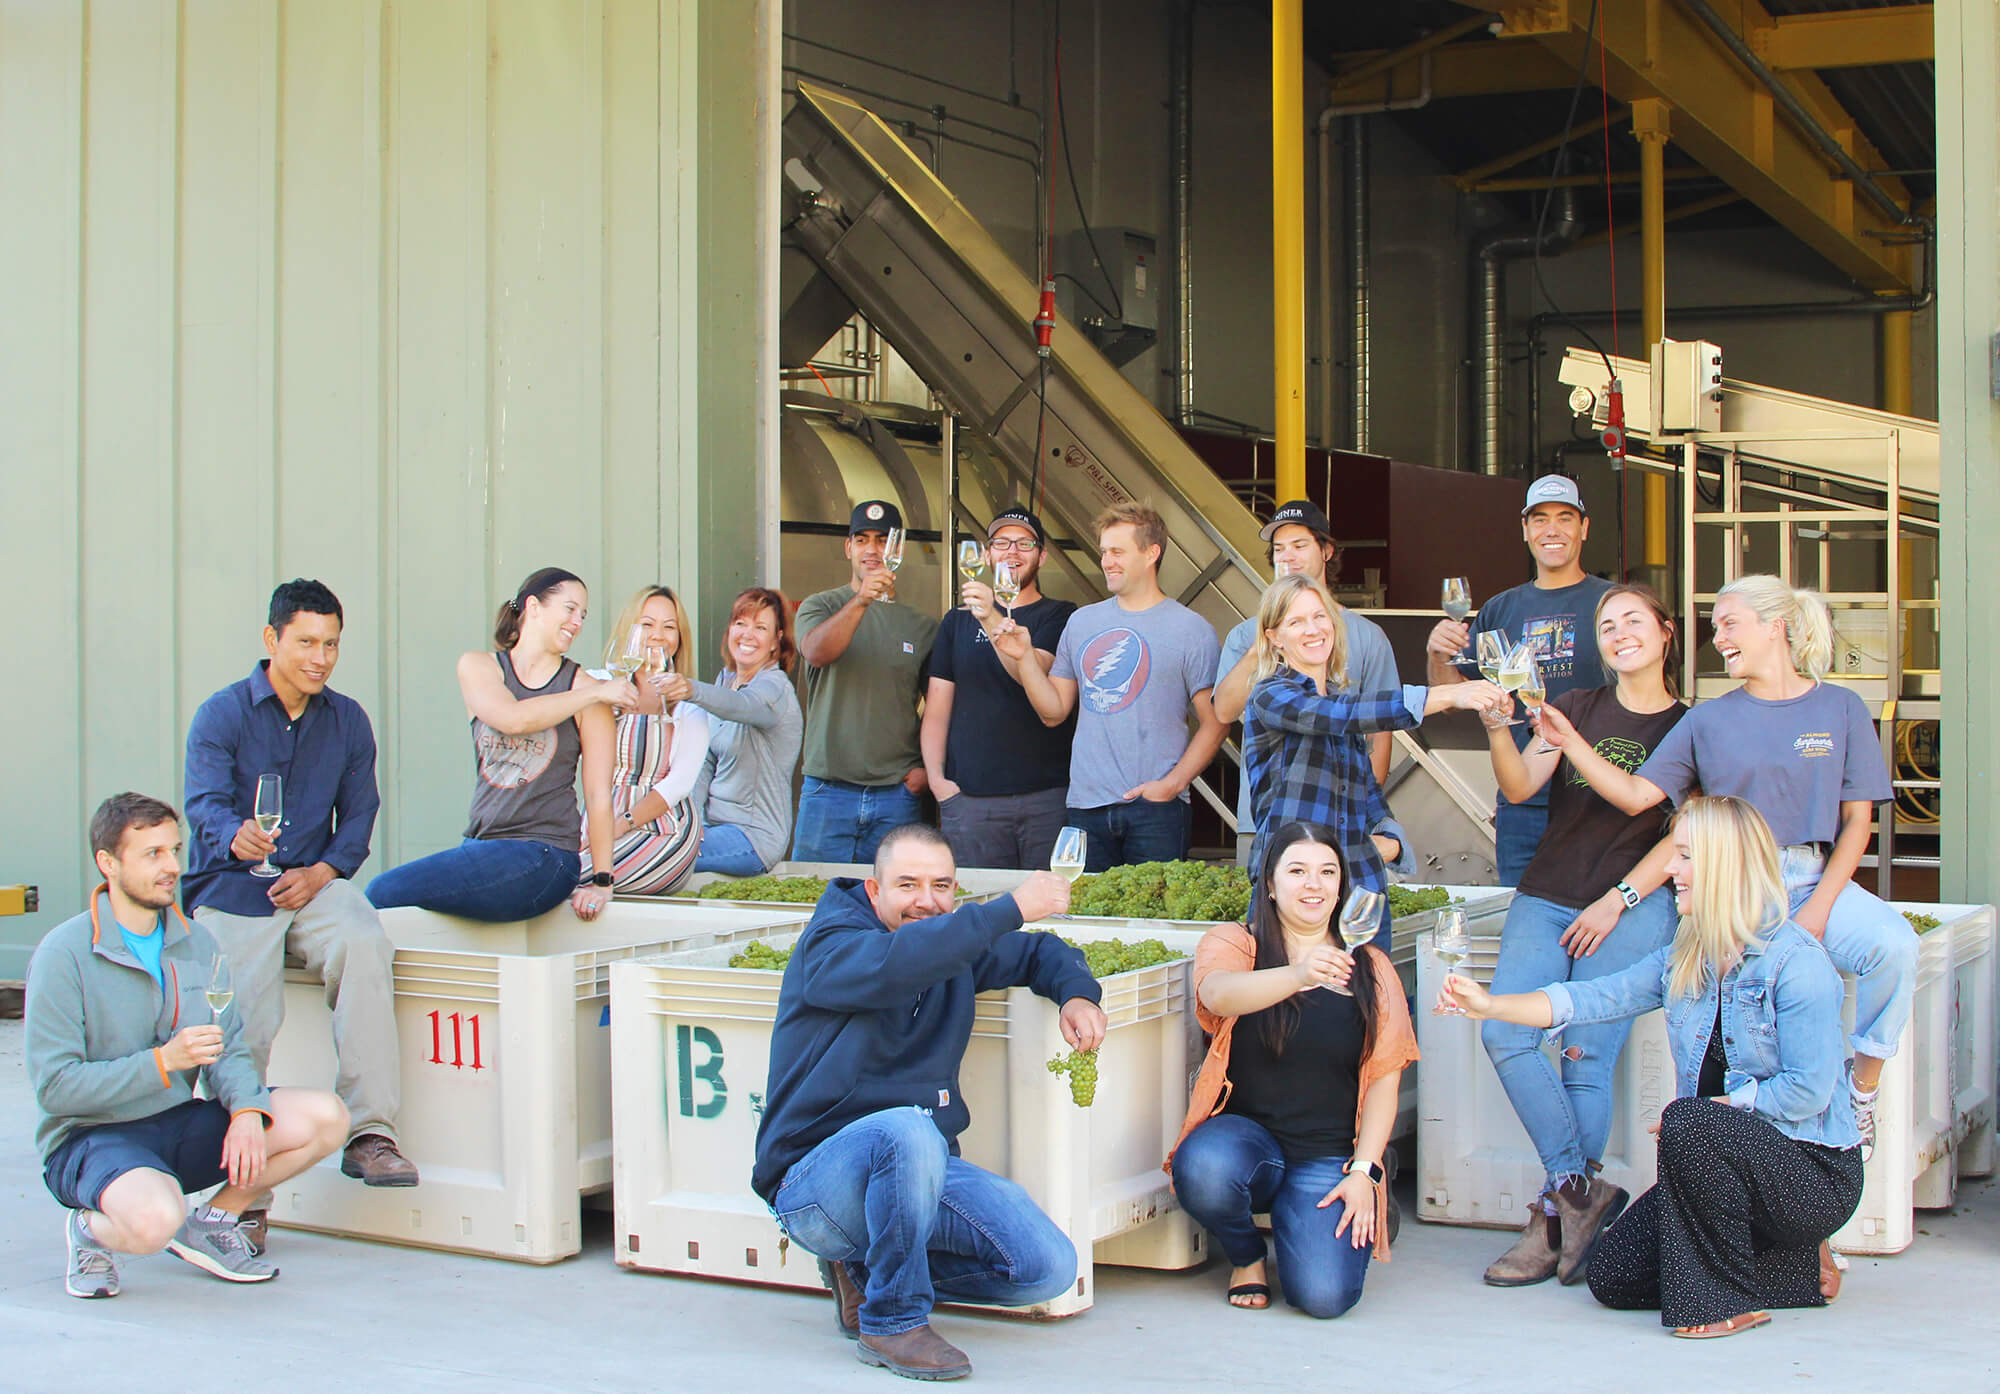 Our team celebrate the start of harvest in front of bins full of grapes